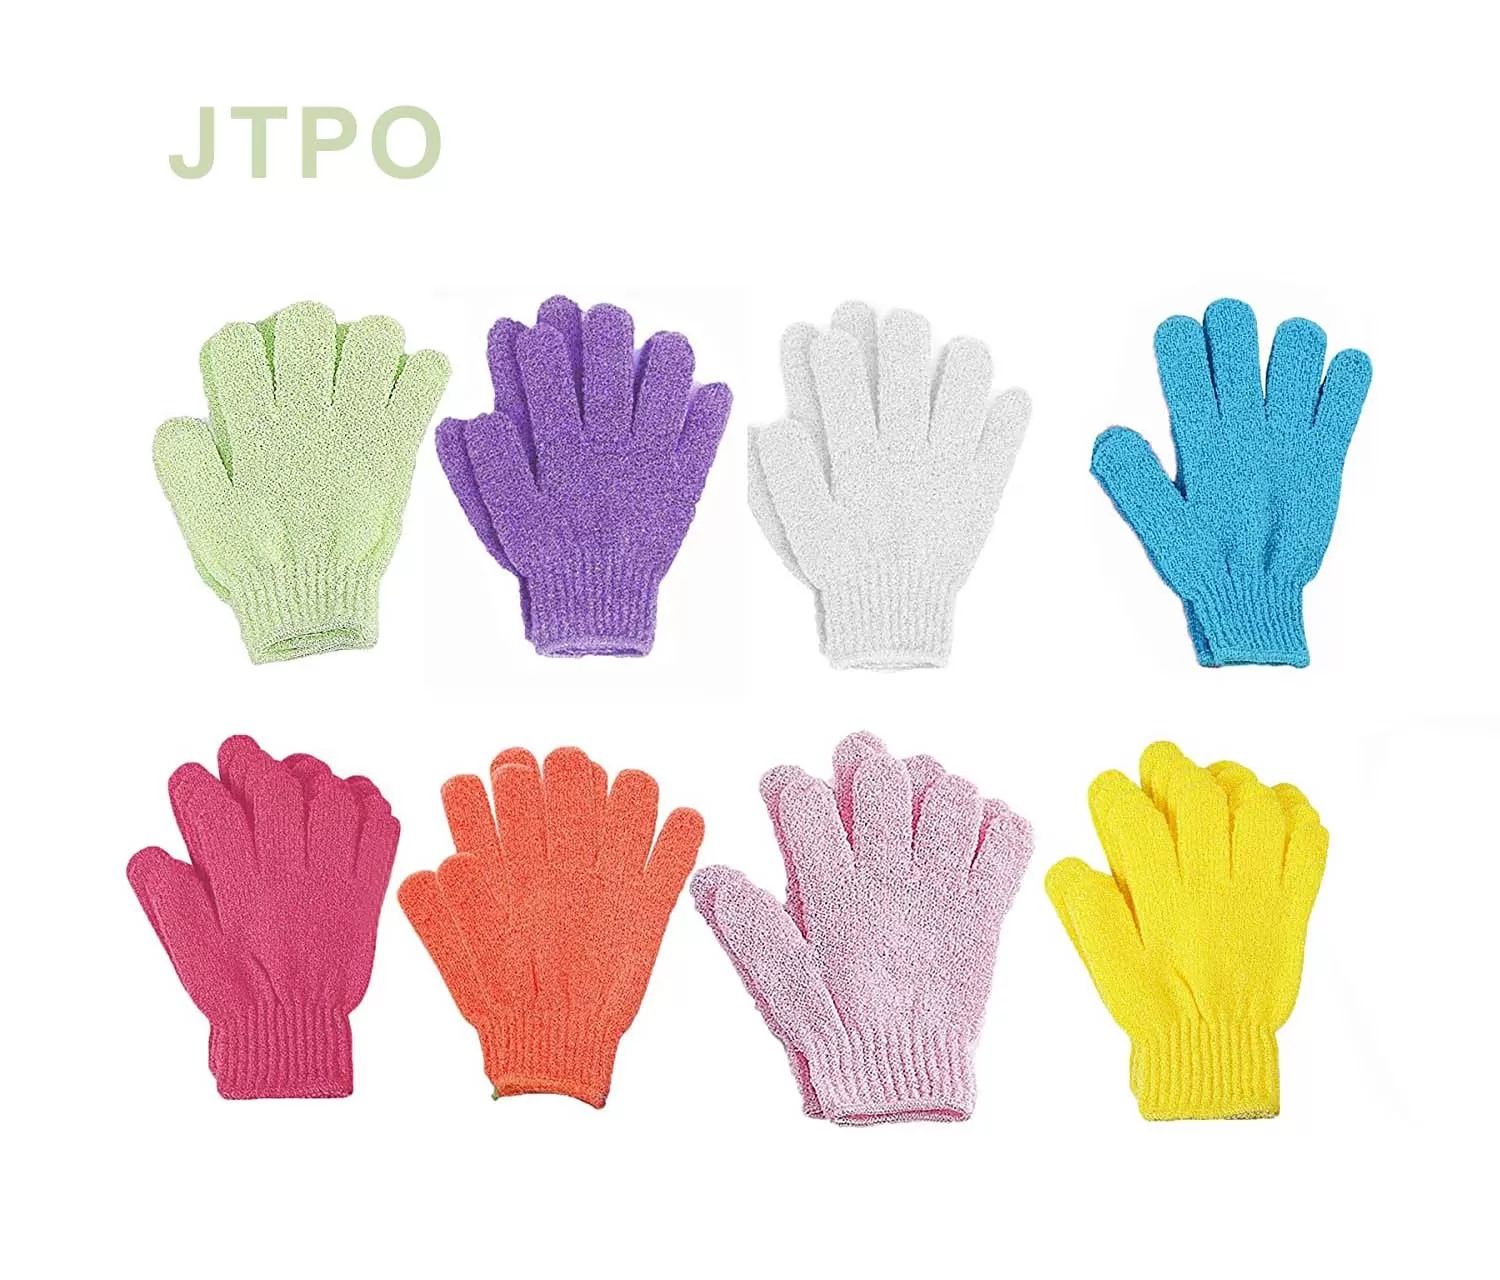 JTPO 8 Pairs Bath Mitts Exfoliating Gloves Bath Scrub Gloves for Shower, Spa and Massage